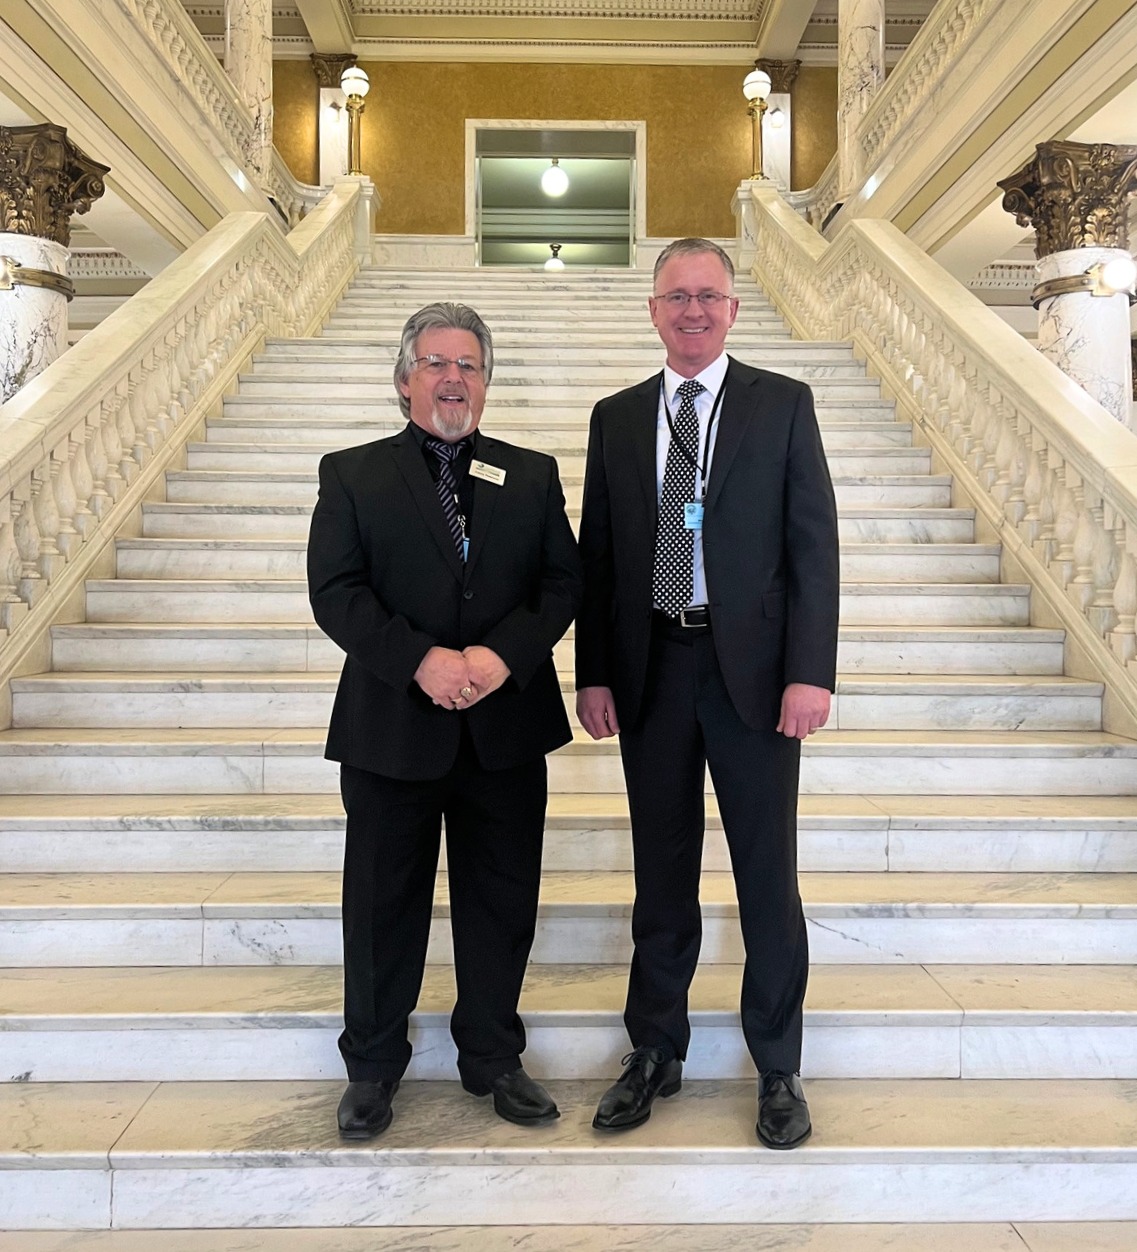 SDSTA chairperson Casey Peterson (left) and SDSTA executive director Mike Headley (right) stand on the steps of the South Dakota State Capitol in Pierre, South Dakota.